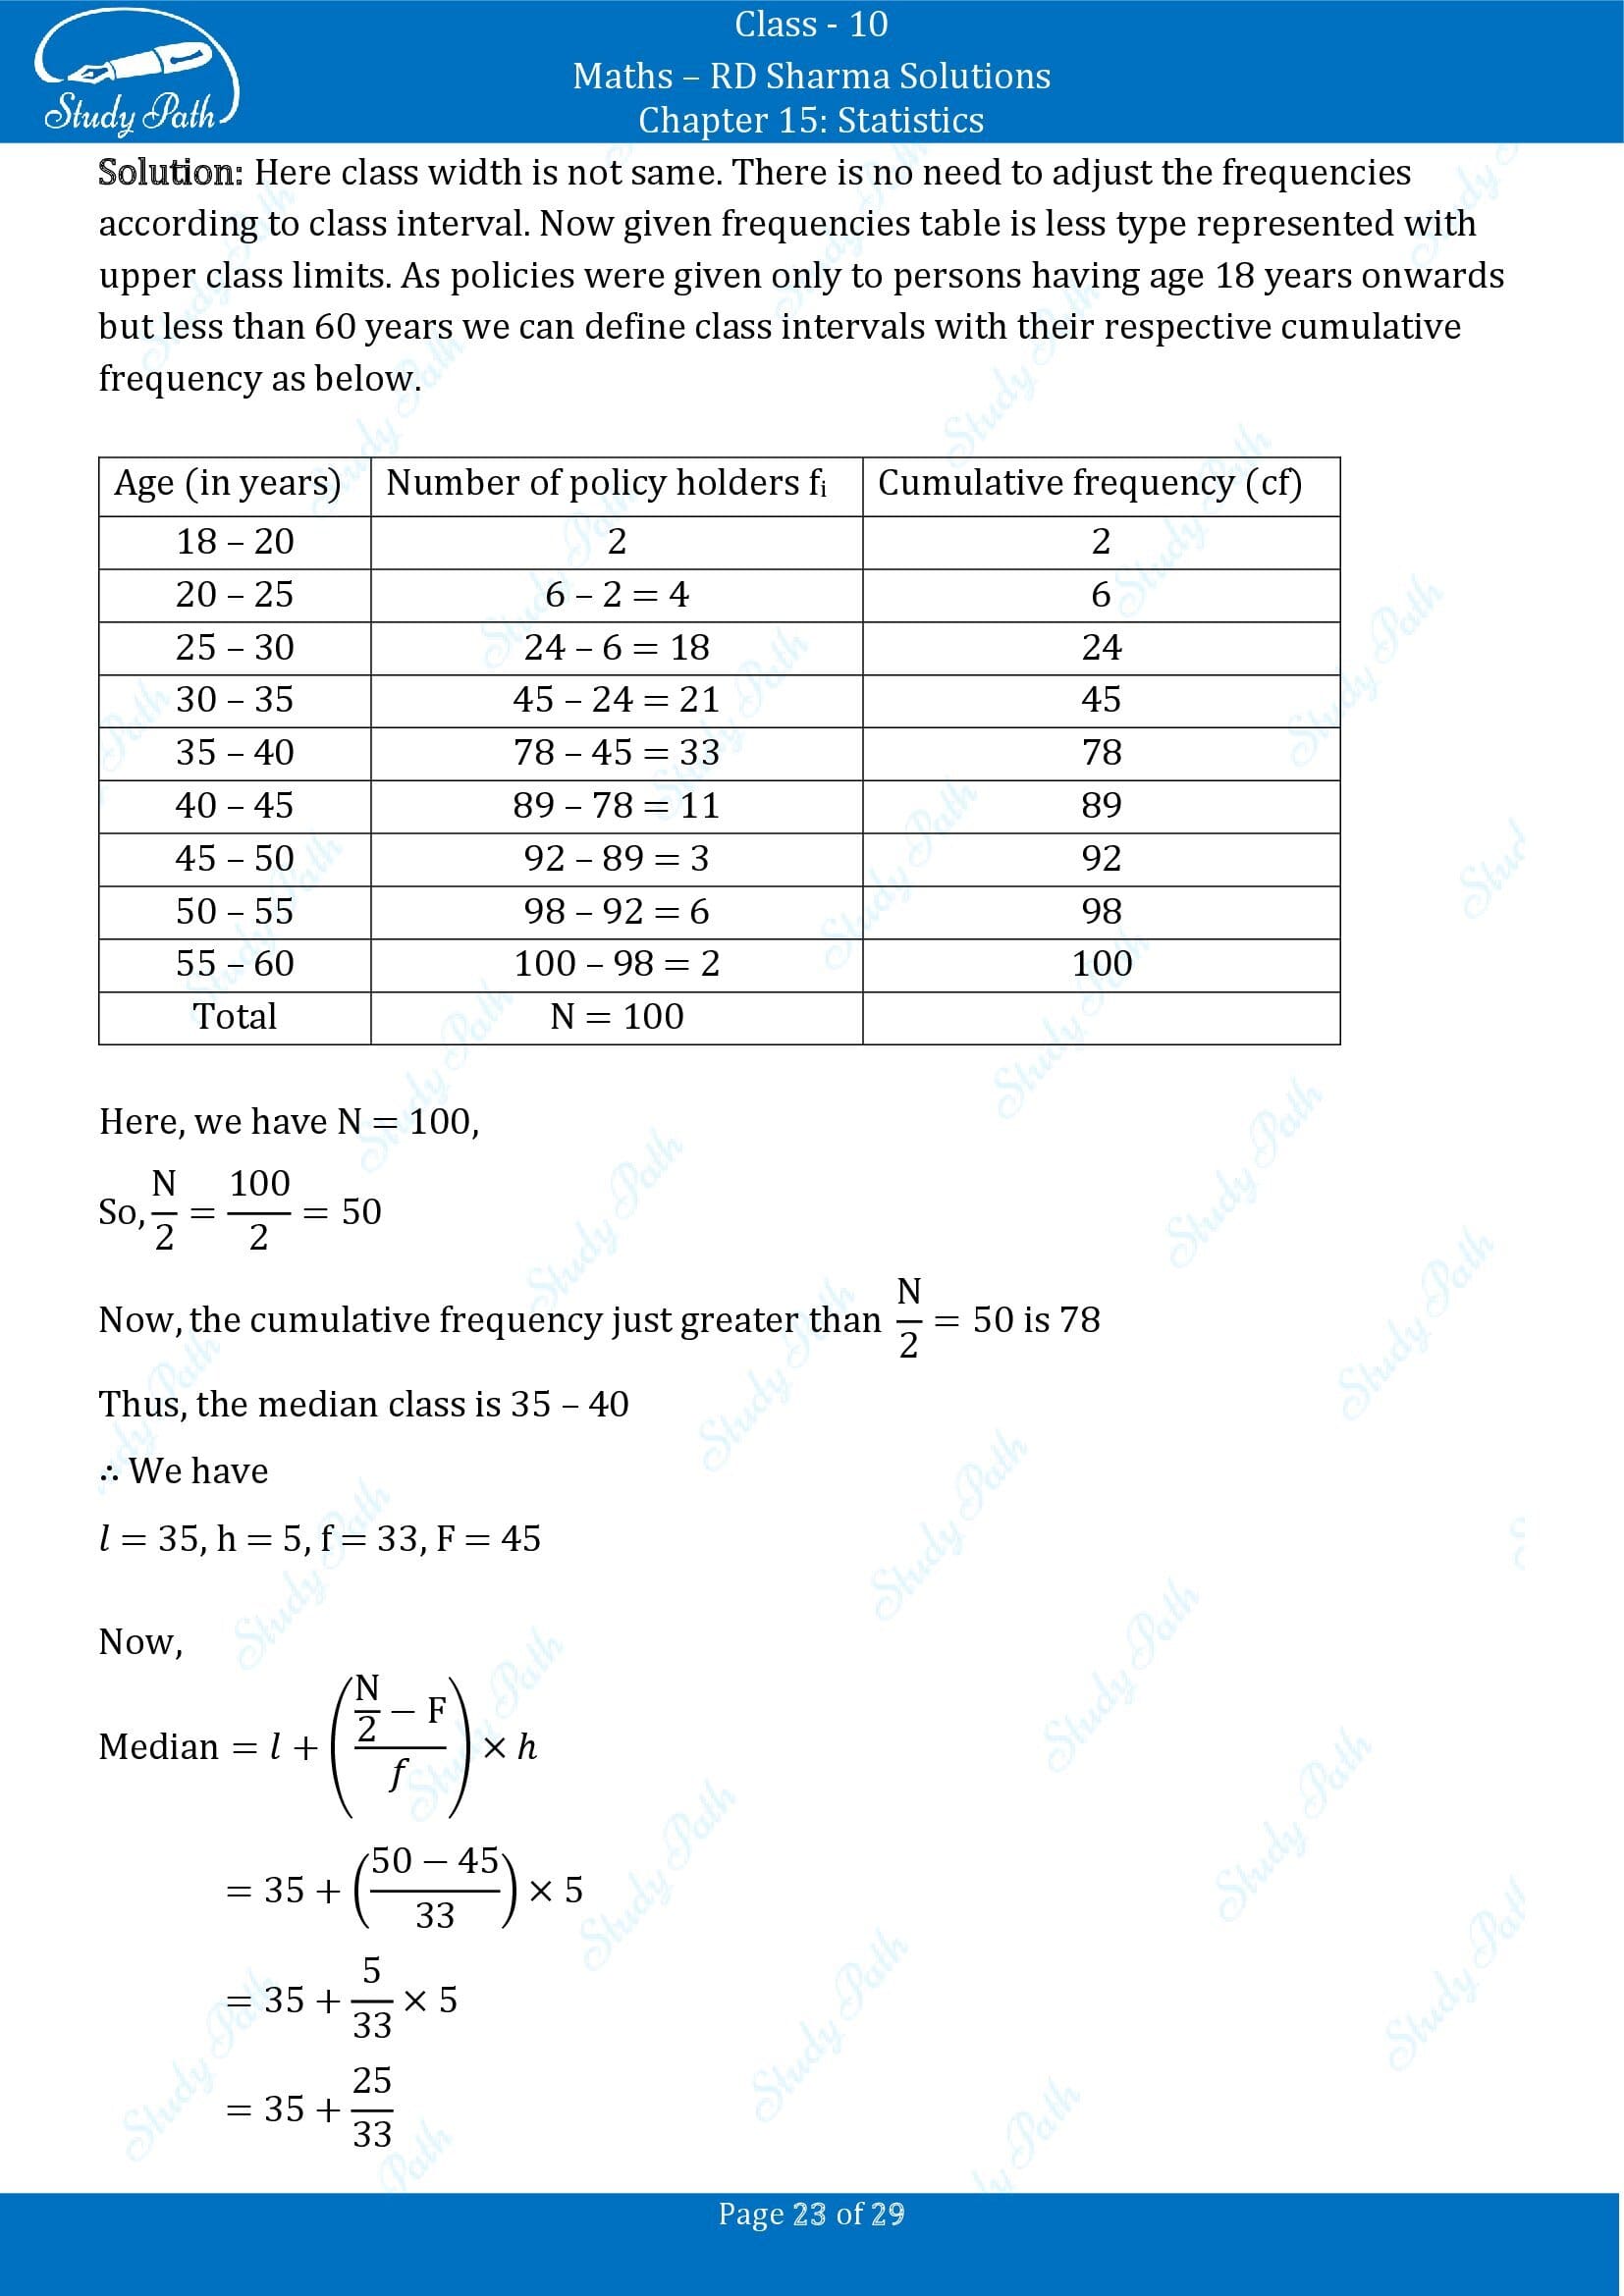 RD Sharma Solutions Class 10 Chapter 15 Statistics Exercise 15.4 00023